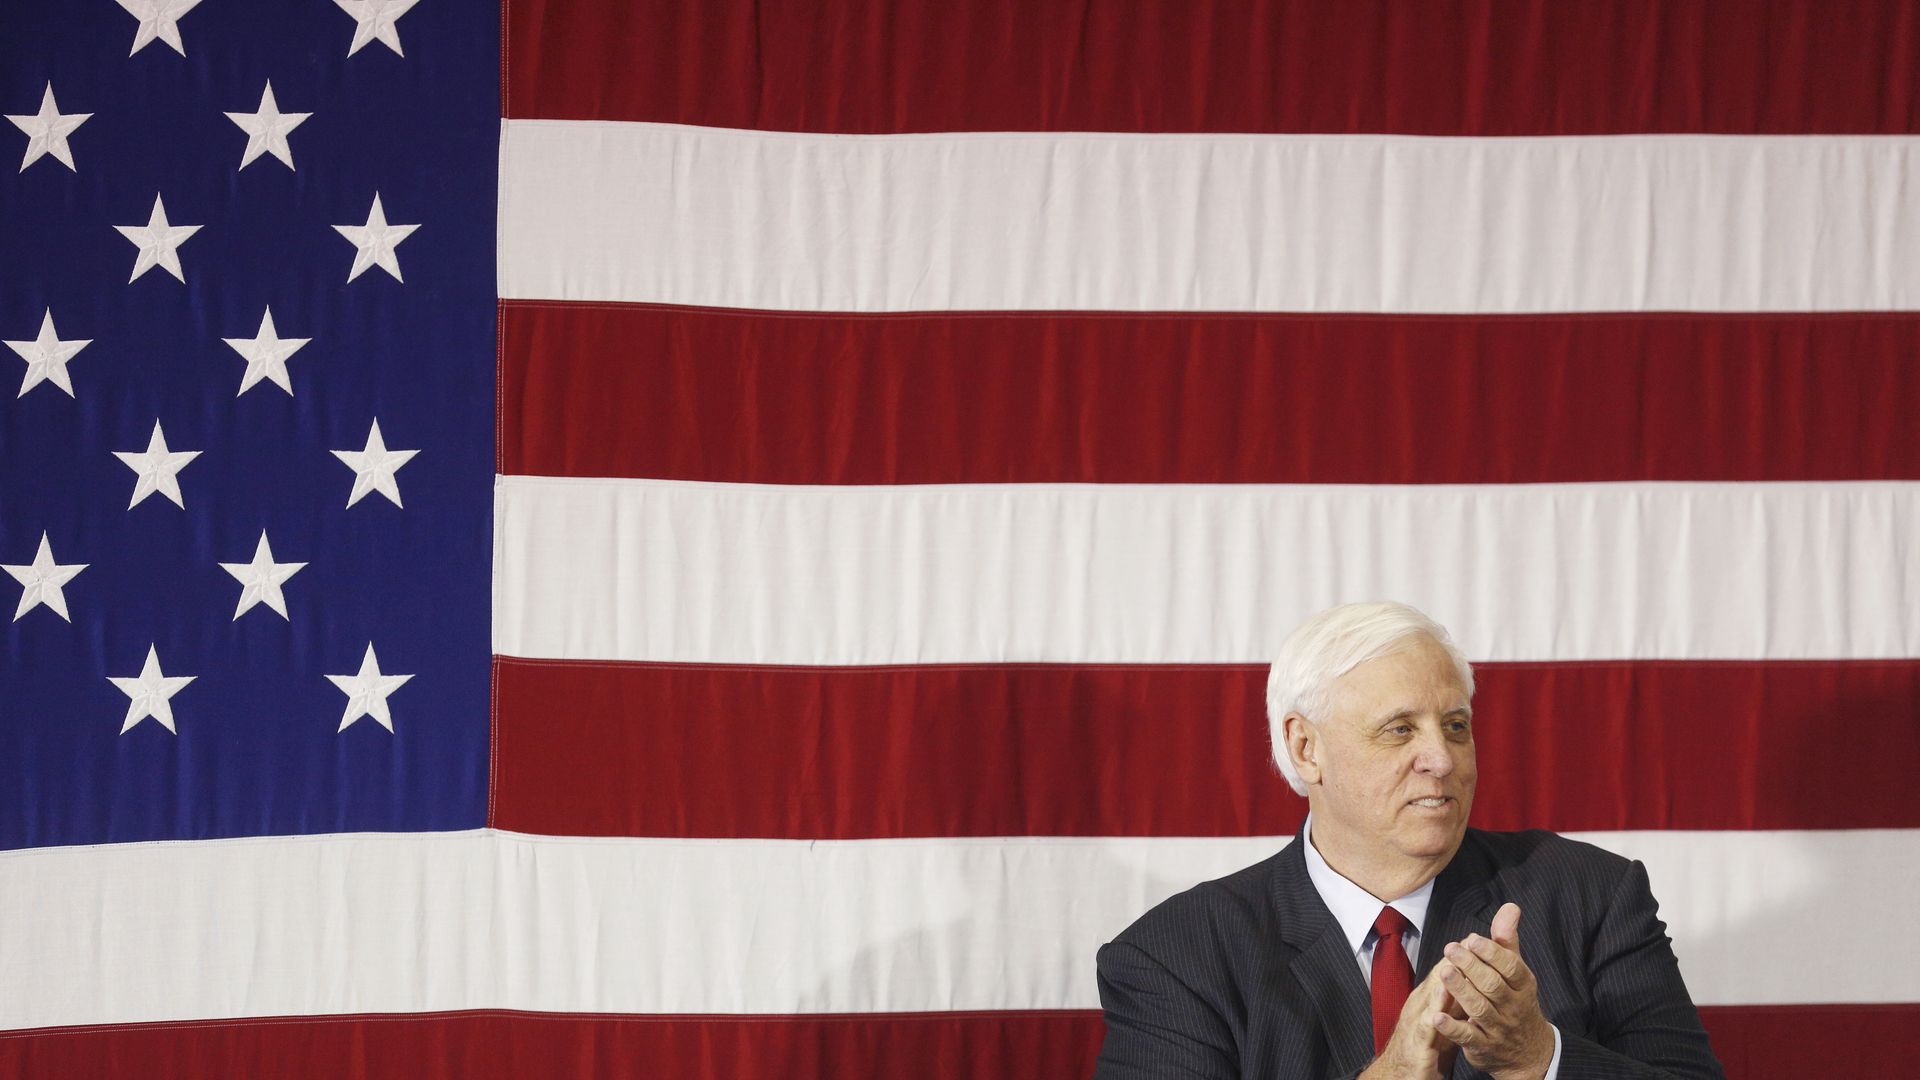 Photo of Jim Justice clapping as he stands against the image of an American flag